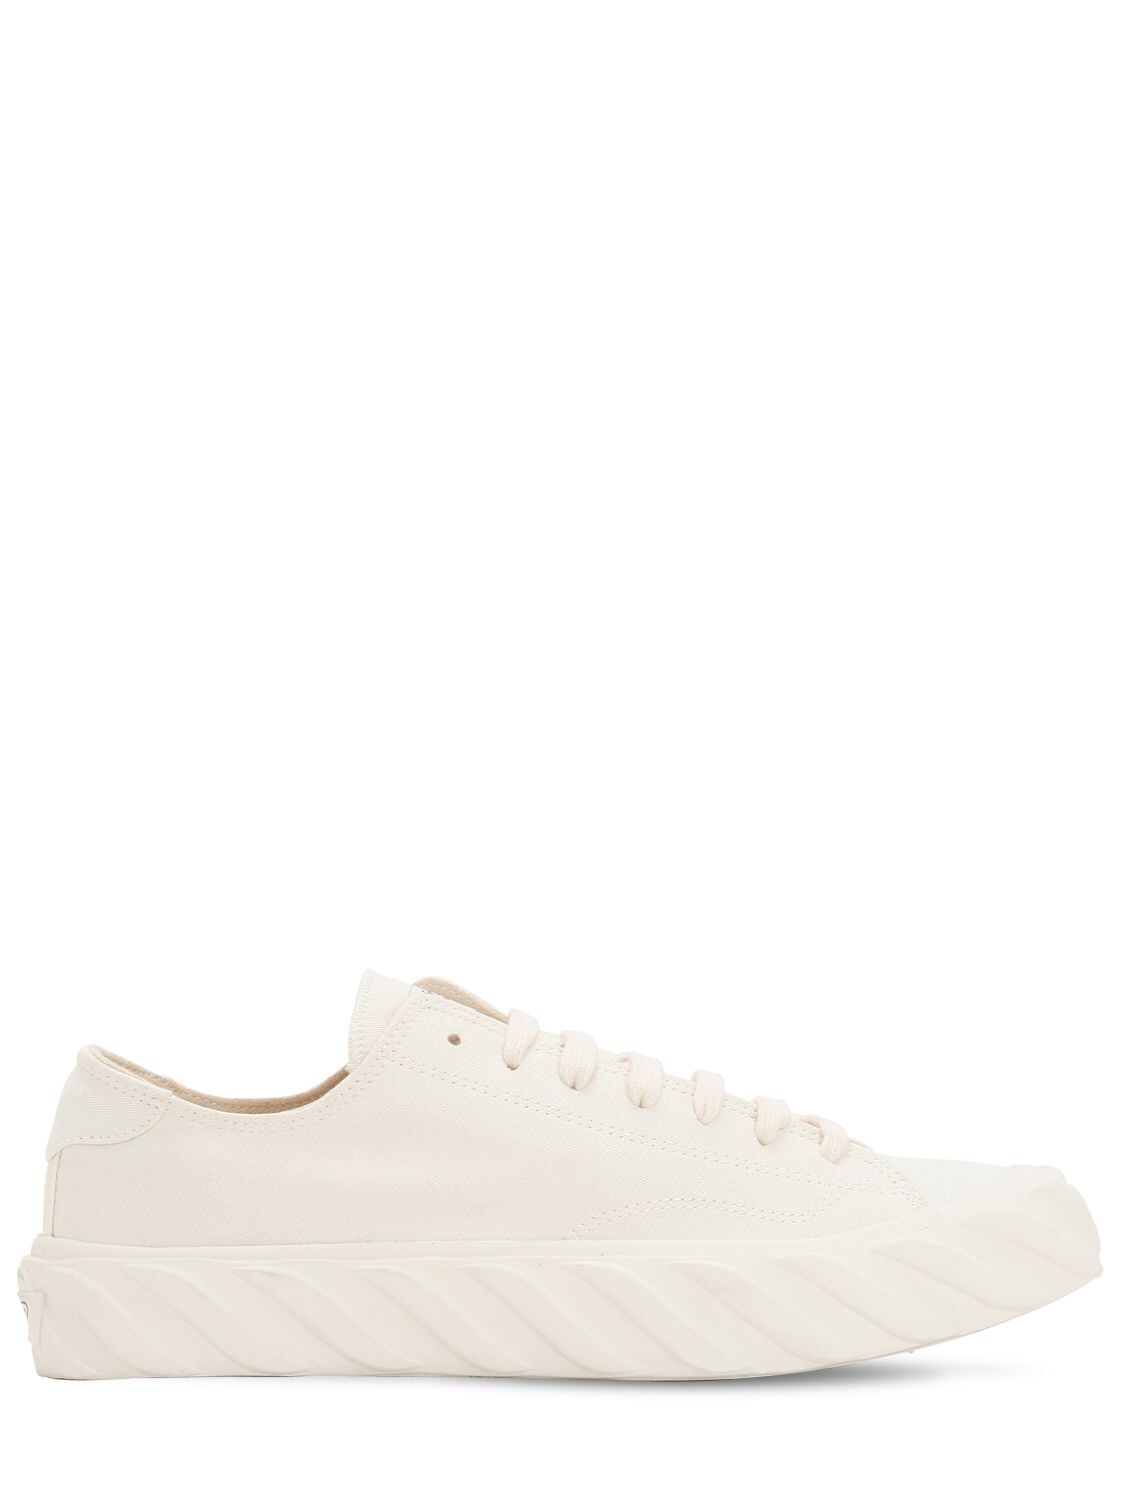 Age - Across To Genuine Era Carbon Coated Canvas Sneakers In White